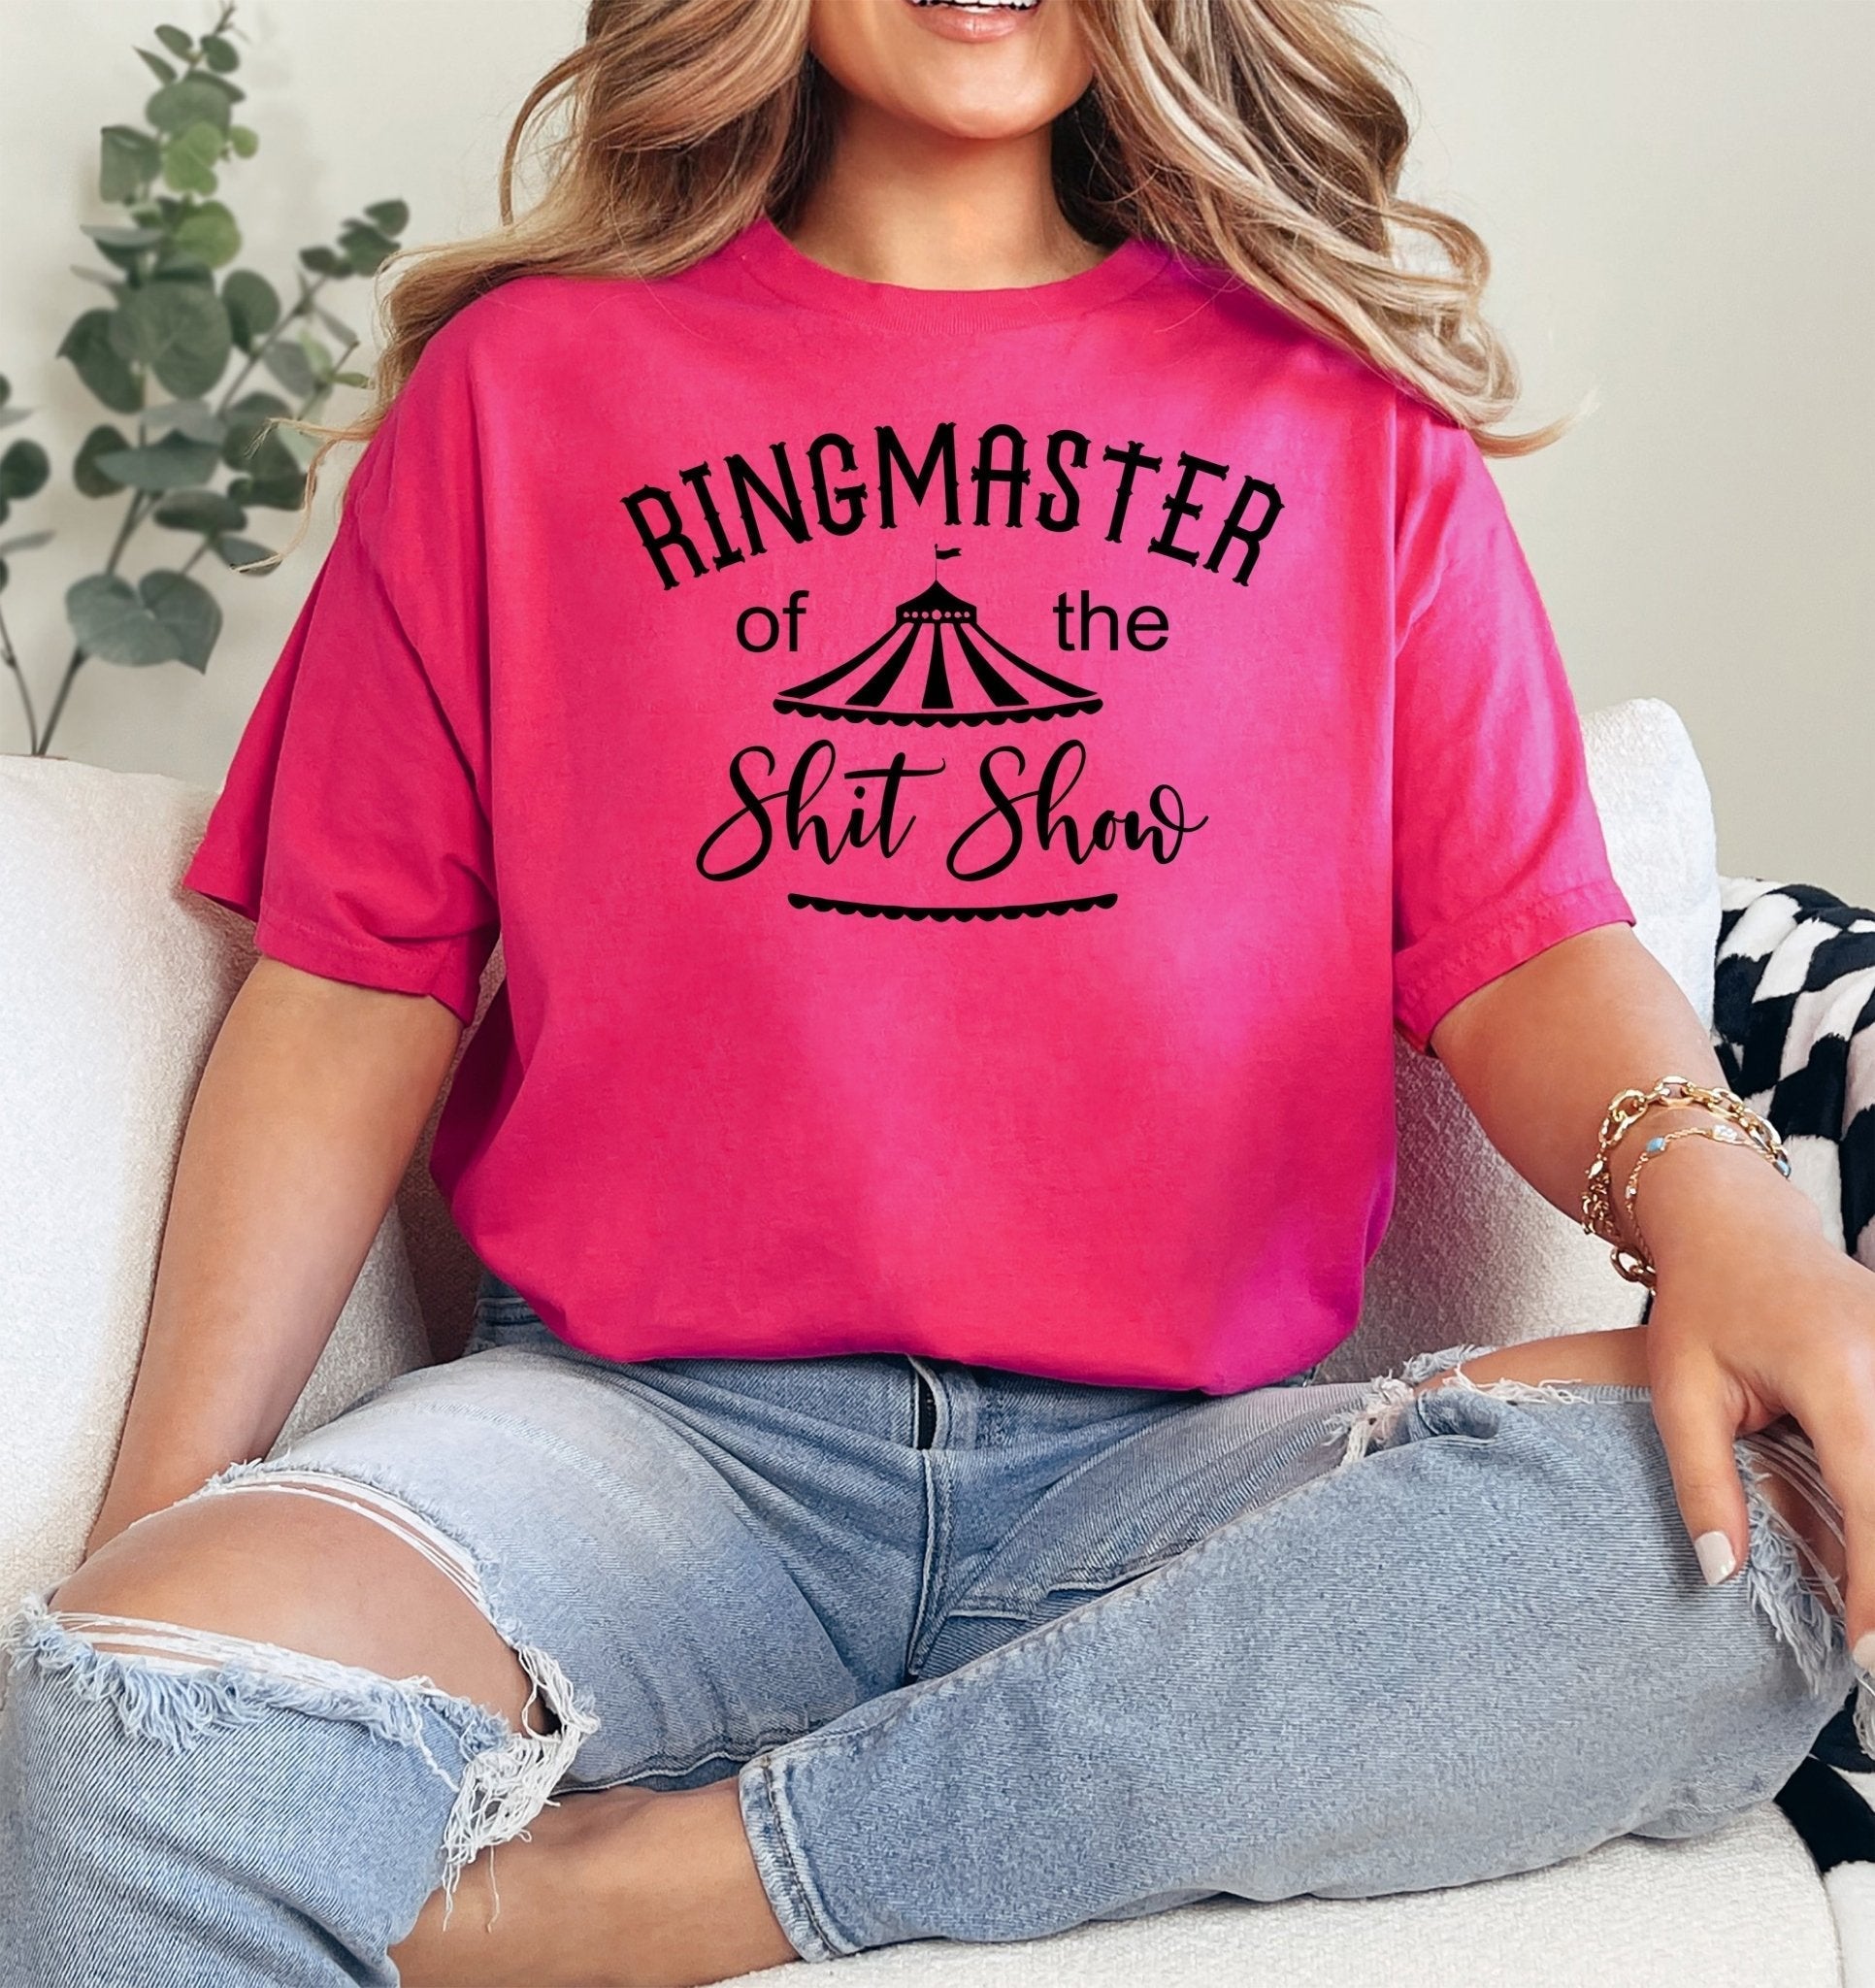 Ringmaster of the Shit Show Adult Cotton Unisex T-Shirt | Cryin Creek